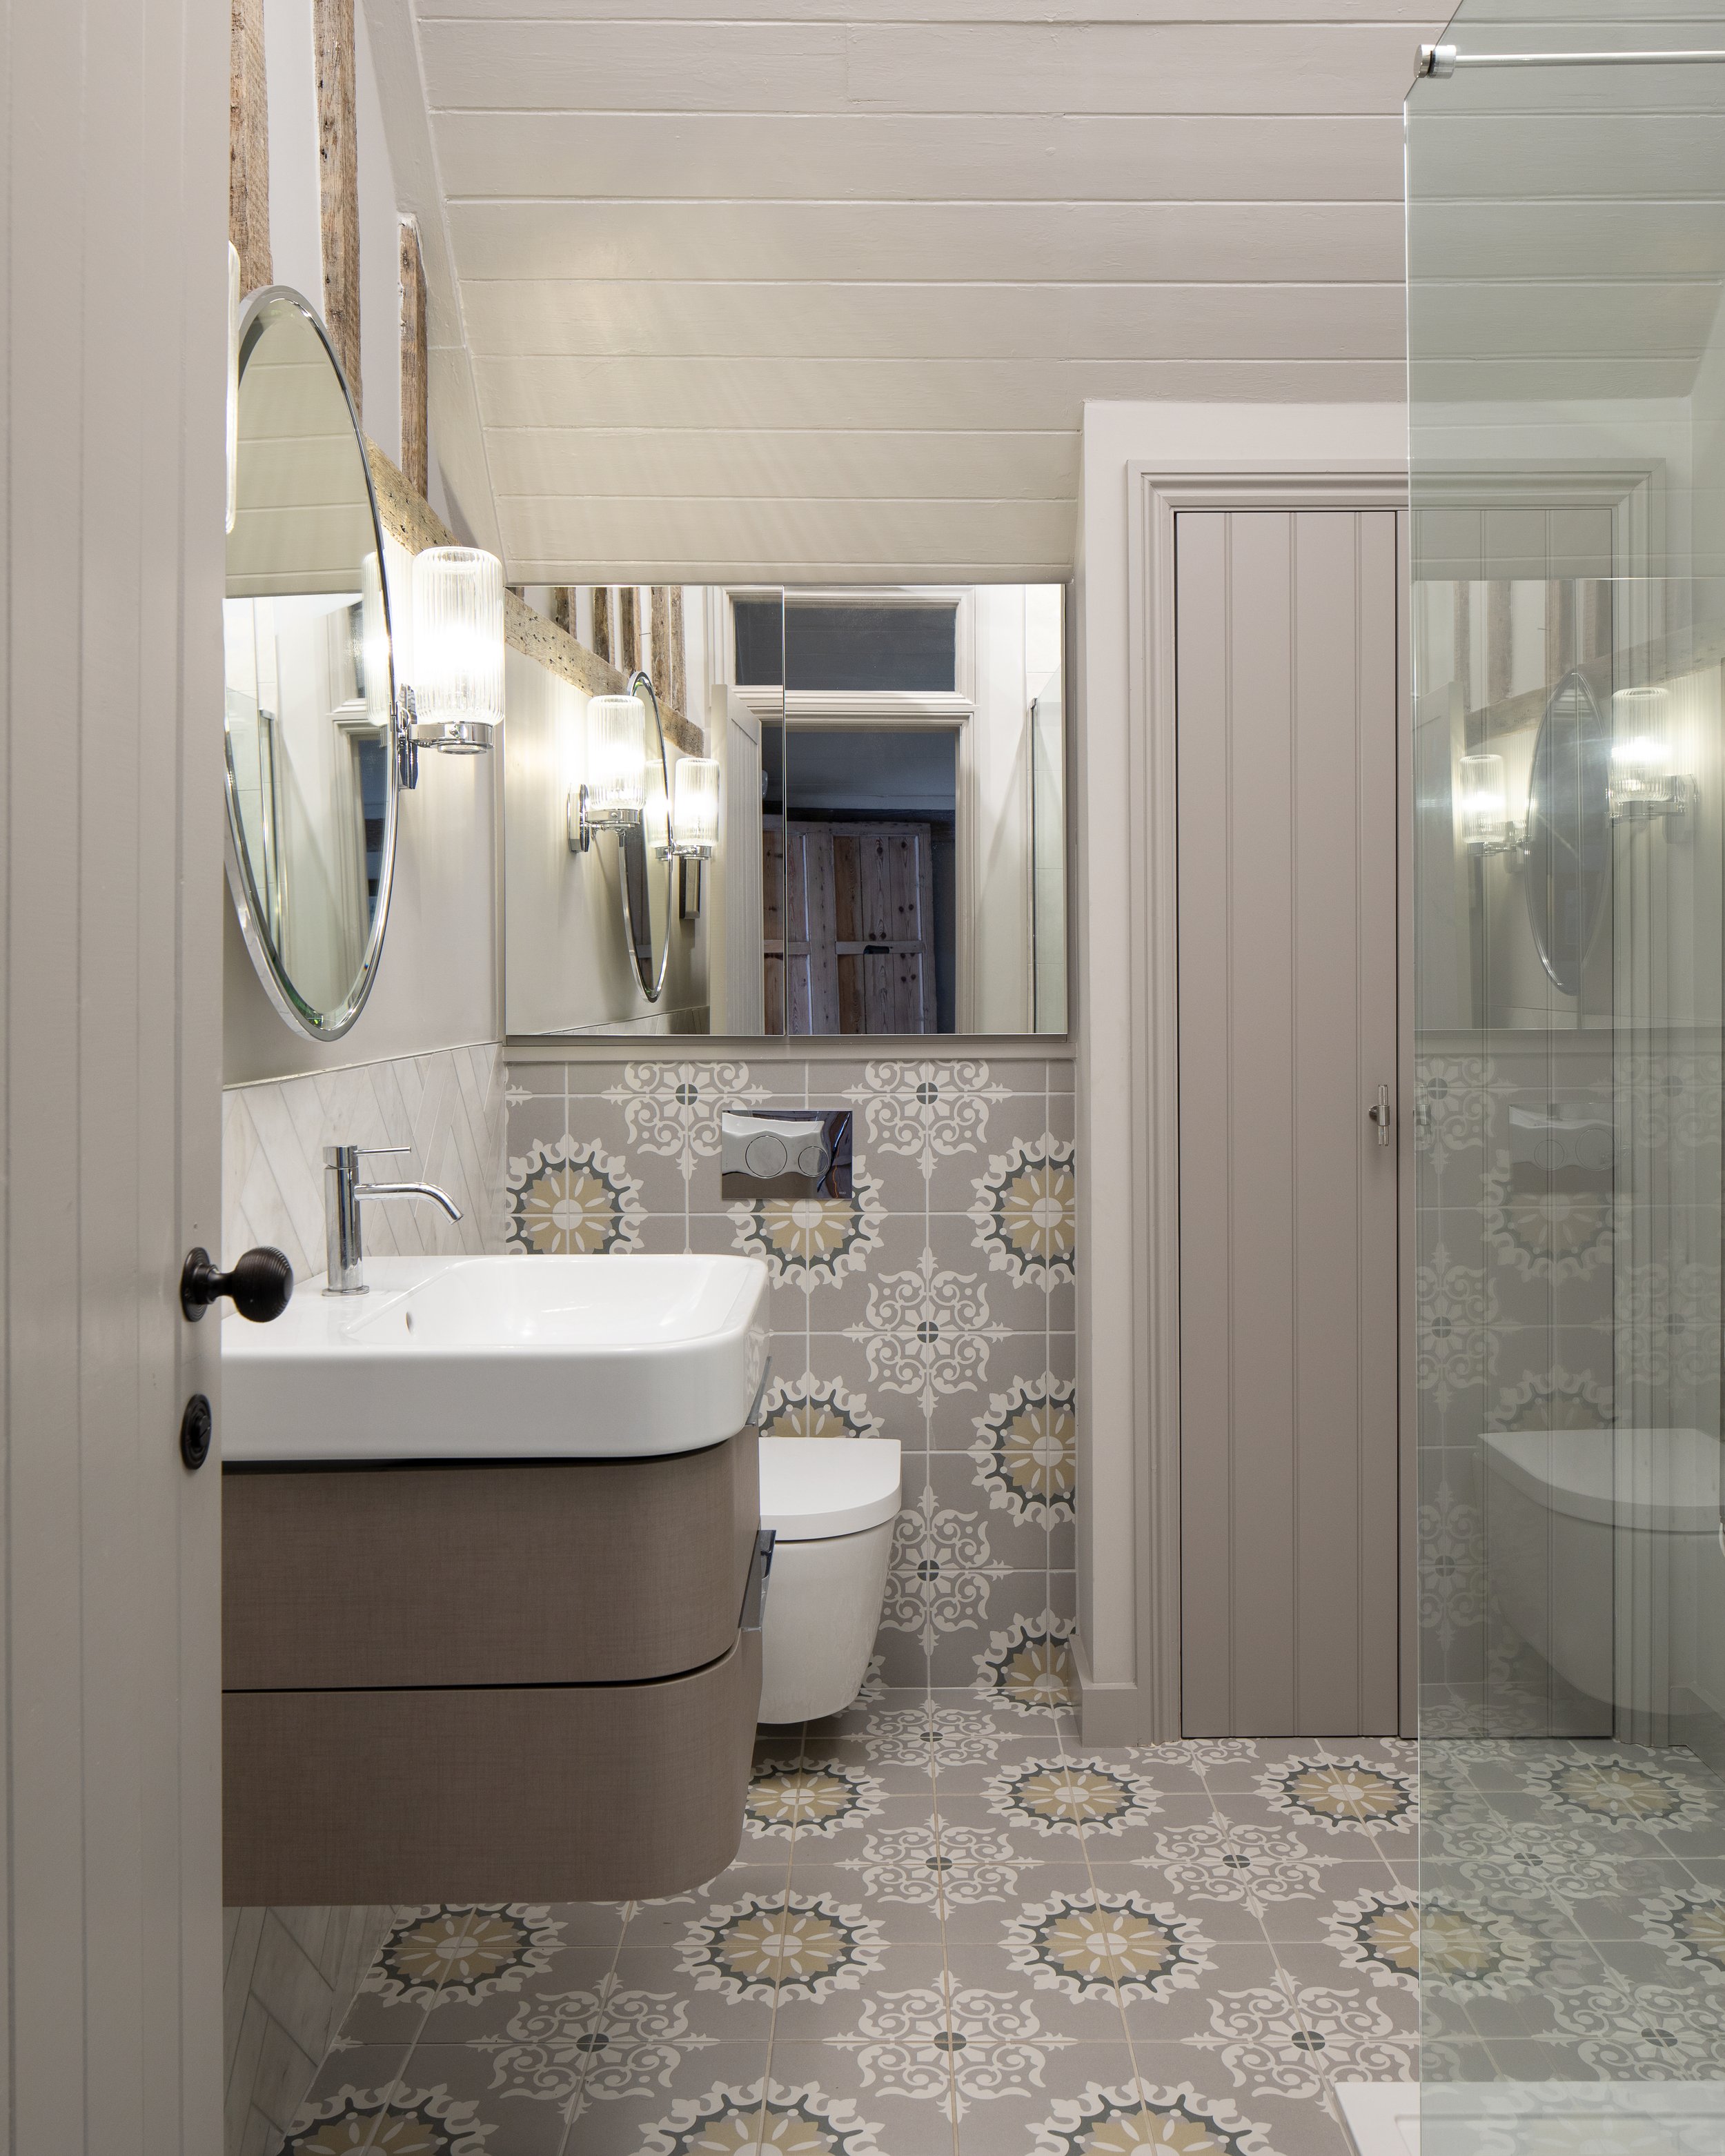 Cottage conversion bathroom with grey patterned tiles.jpg